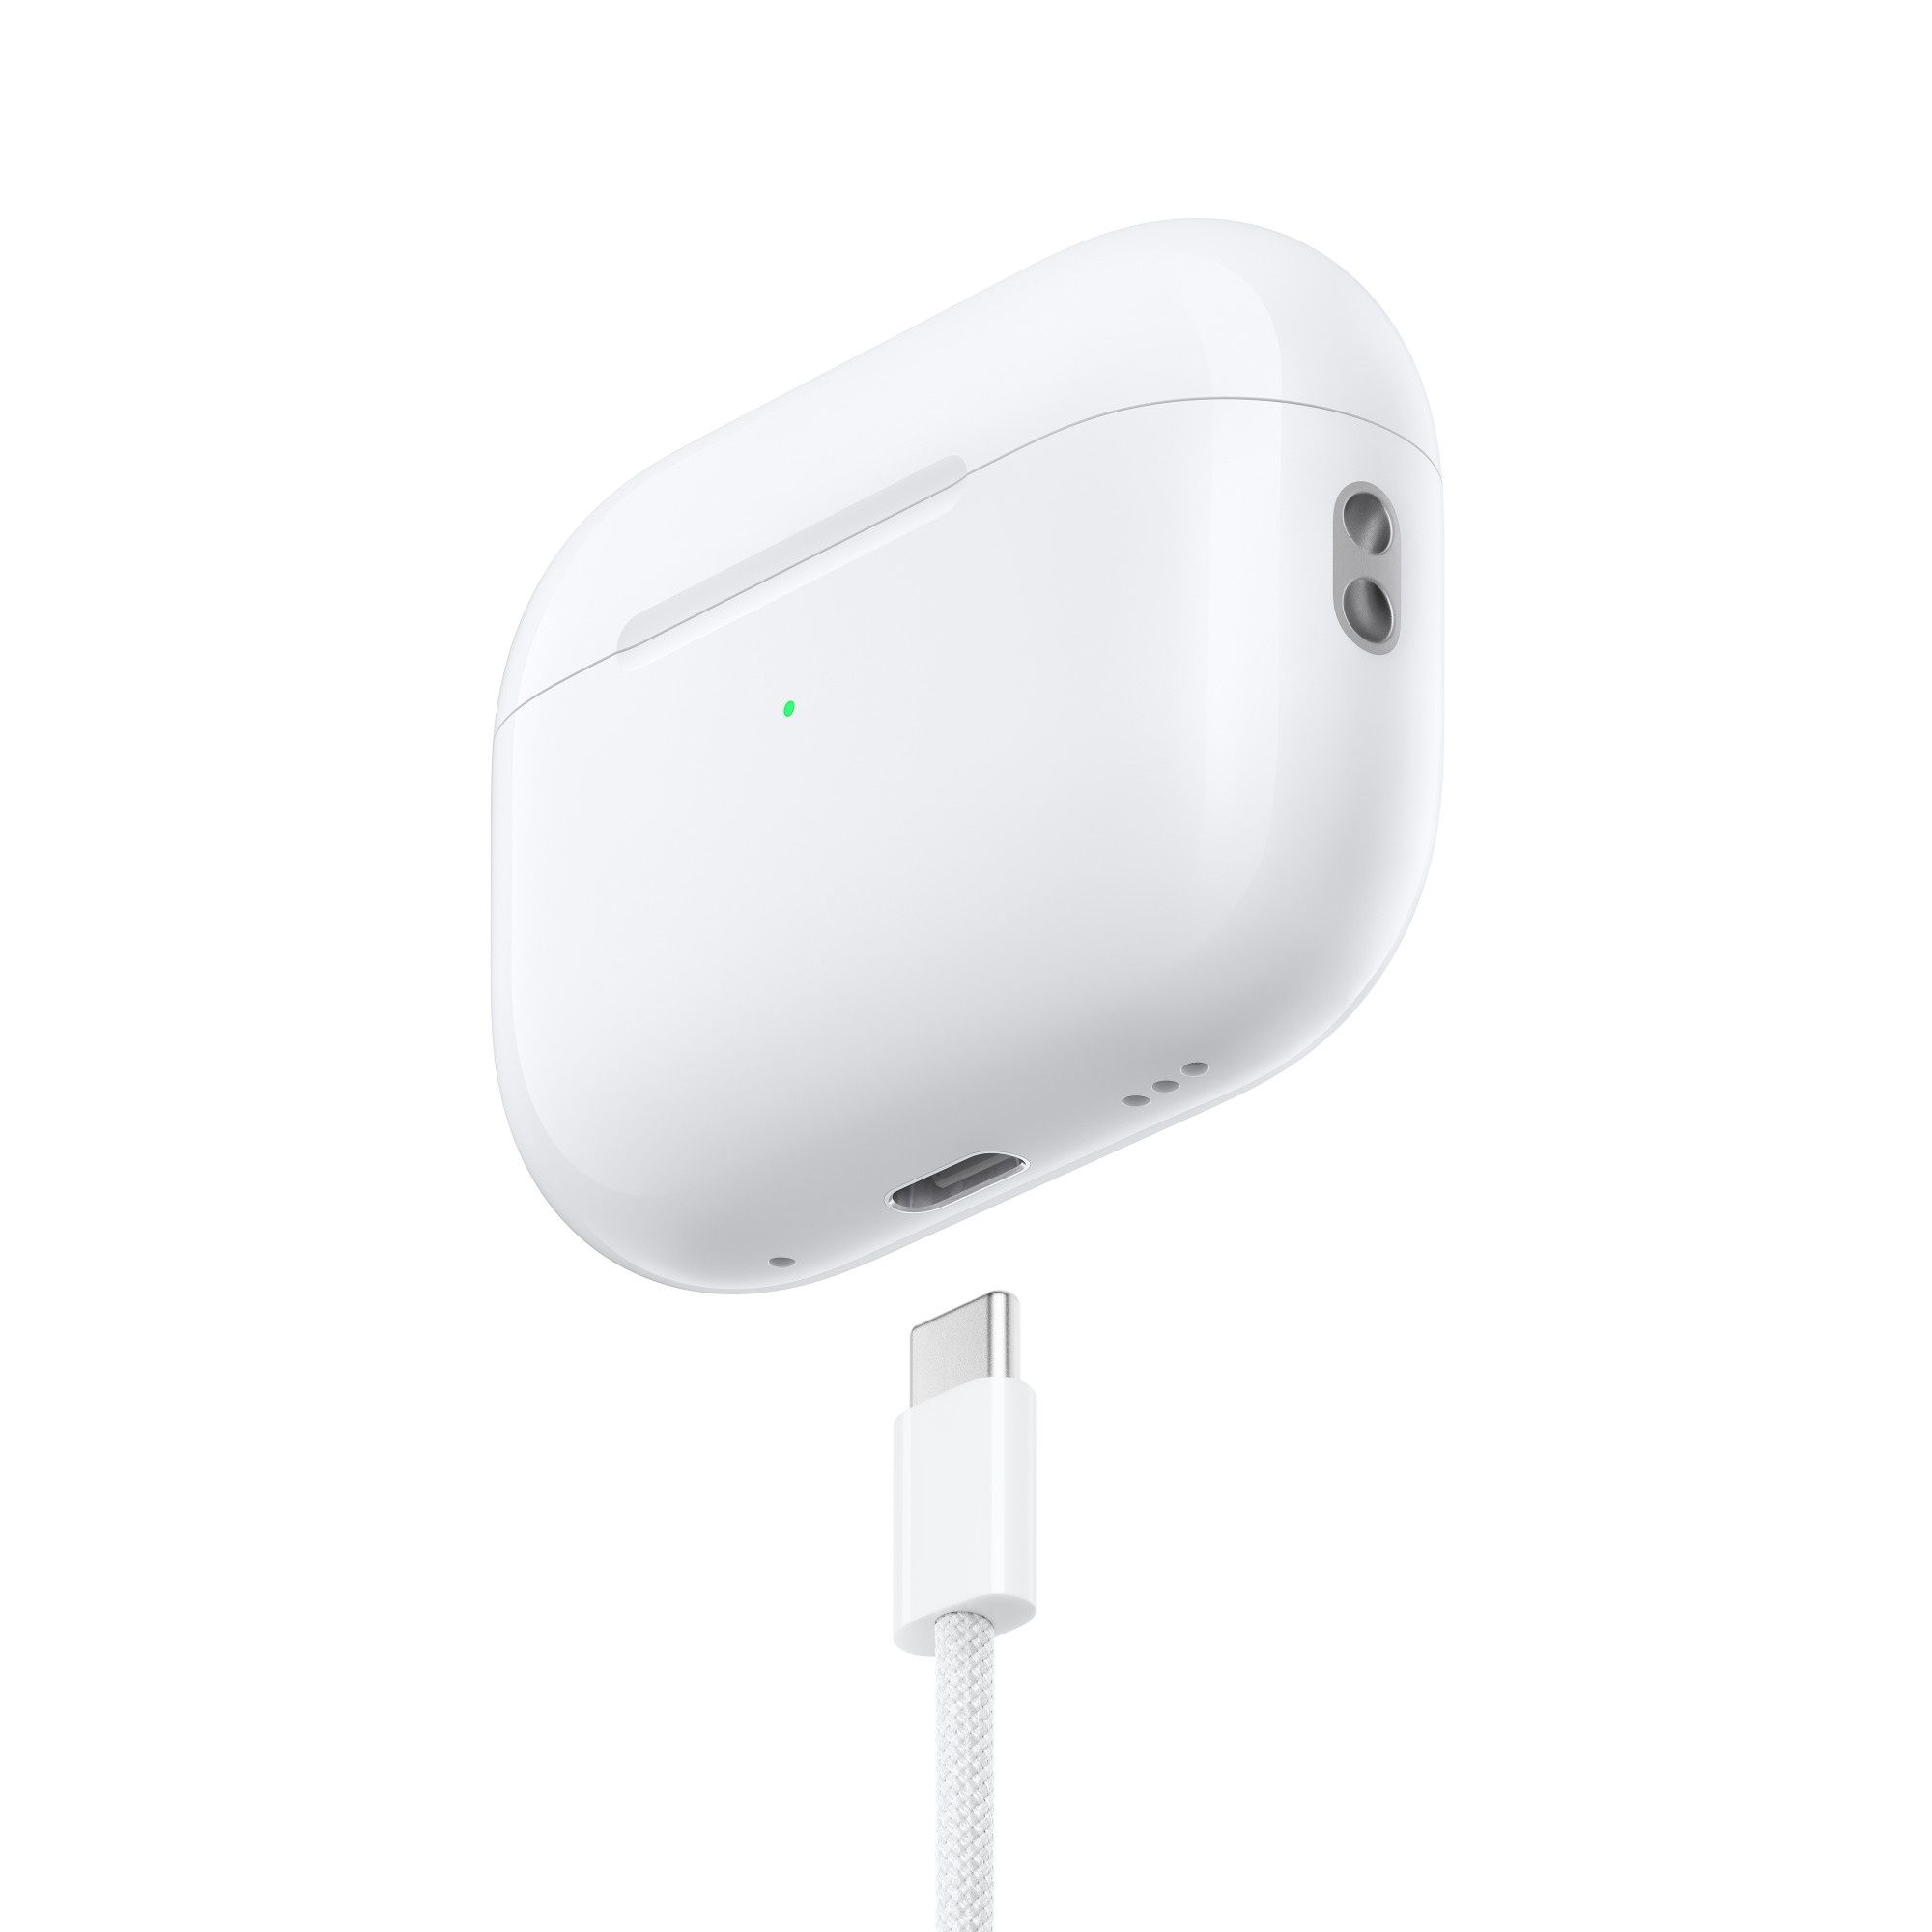 Inkax air pods pro 2 ANS